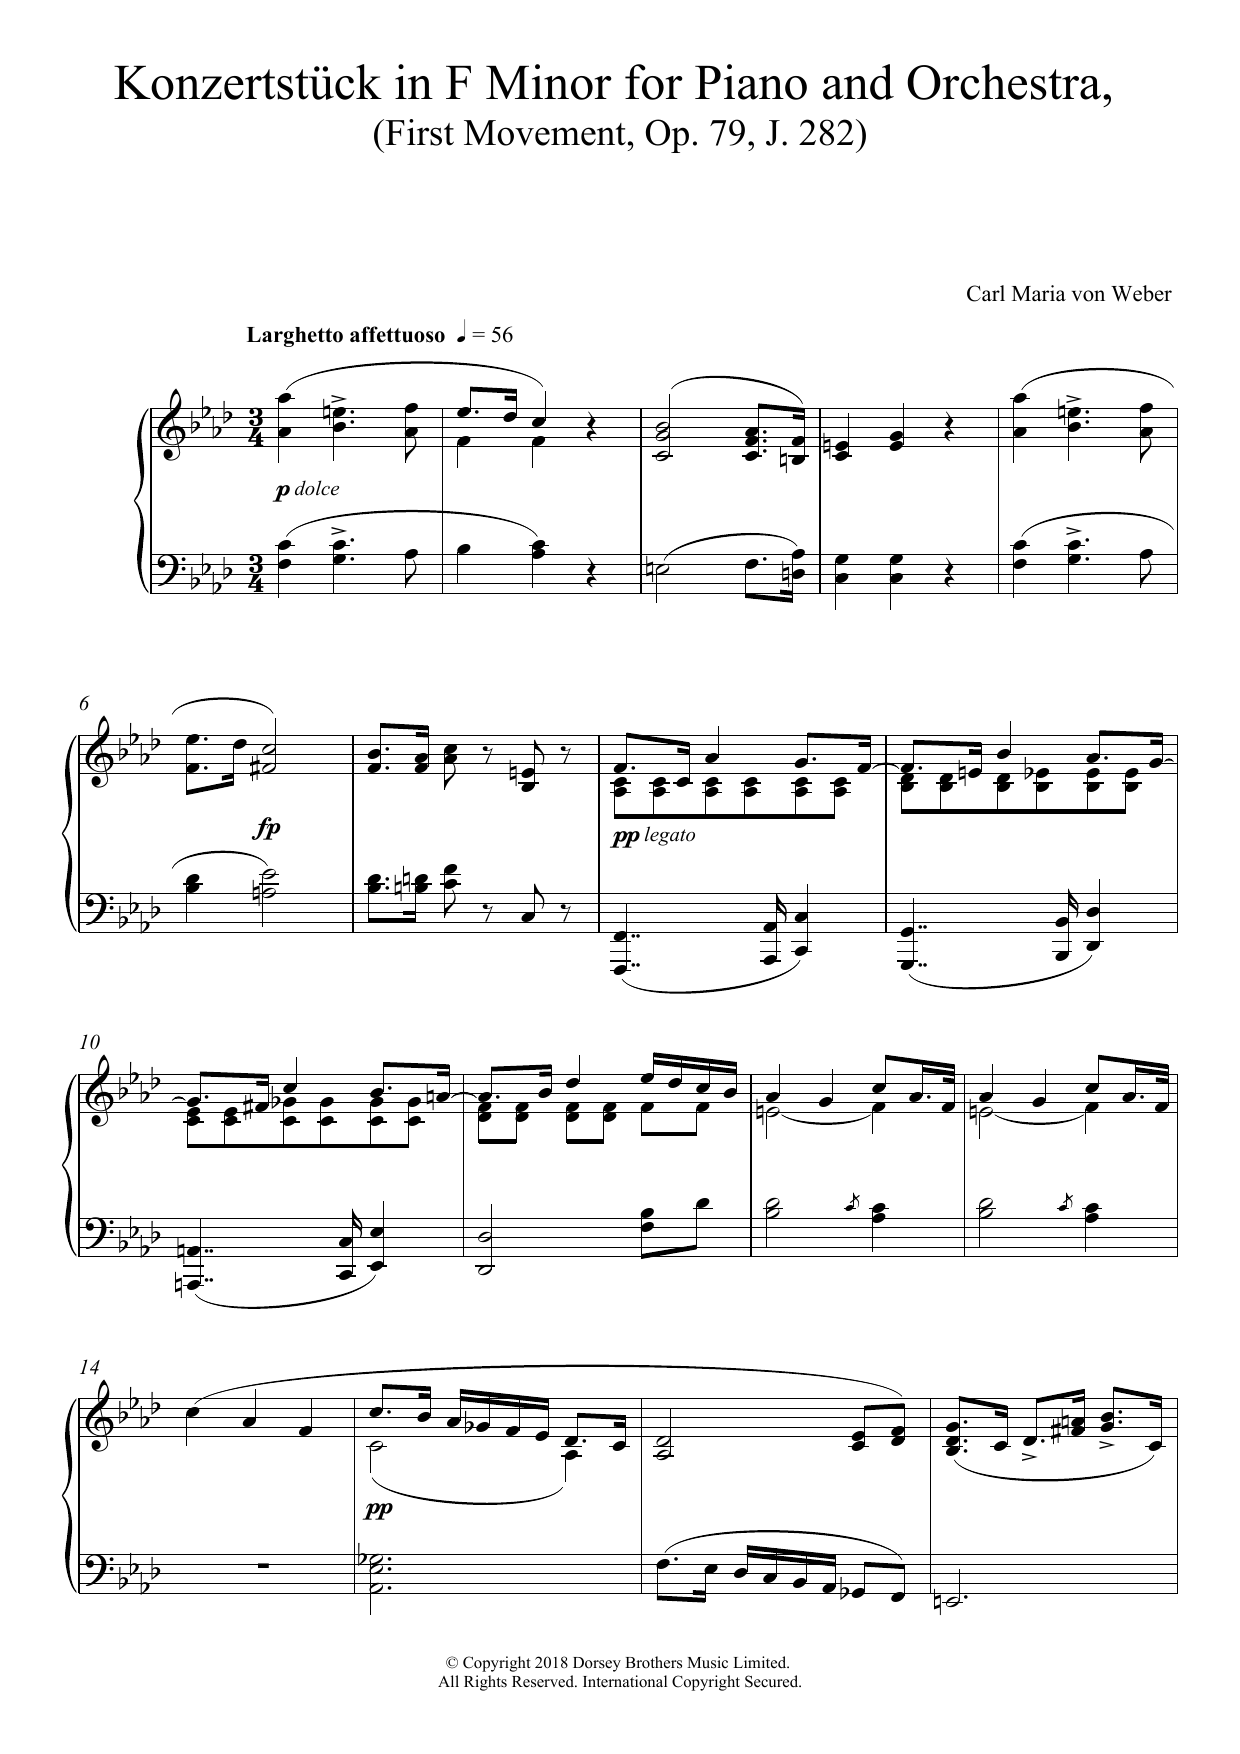 Konzertstuck in F Minor for Piano and Orchestra, First Movement, Op. 79, J. 282 sheet music